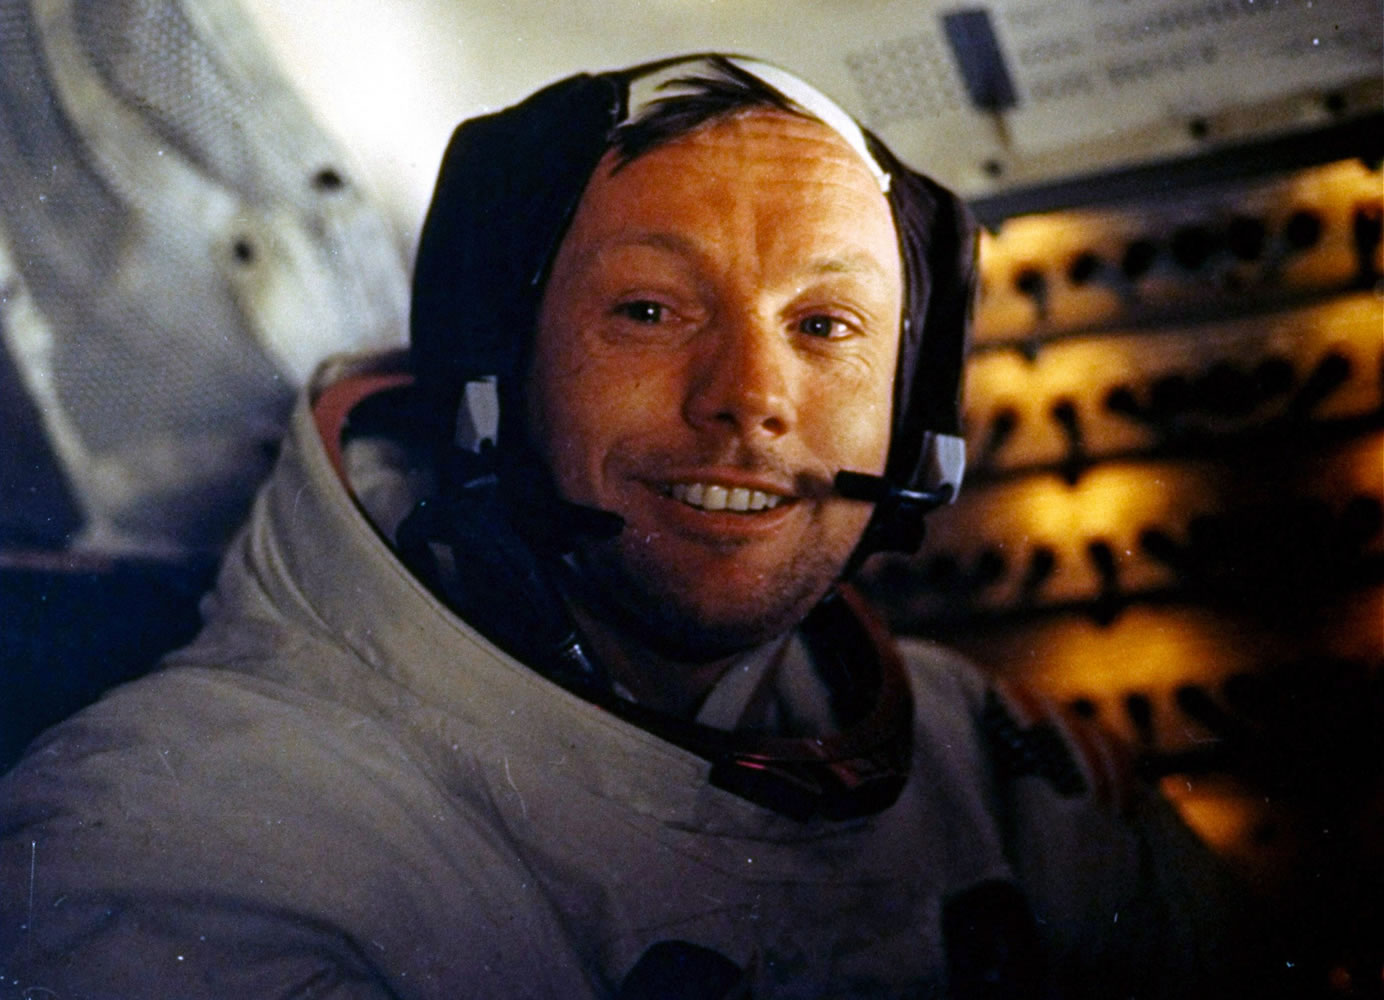 This July 20, 1969 file photo provided by NASA shows Neil Armstrong. The family of Neil Armstrong, the first man to walk on the moon, says he has died at age 82. A statement from the family says he died following complications resulting from cardiovascular procedures.